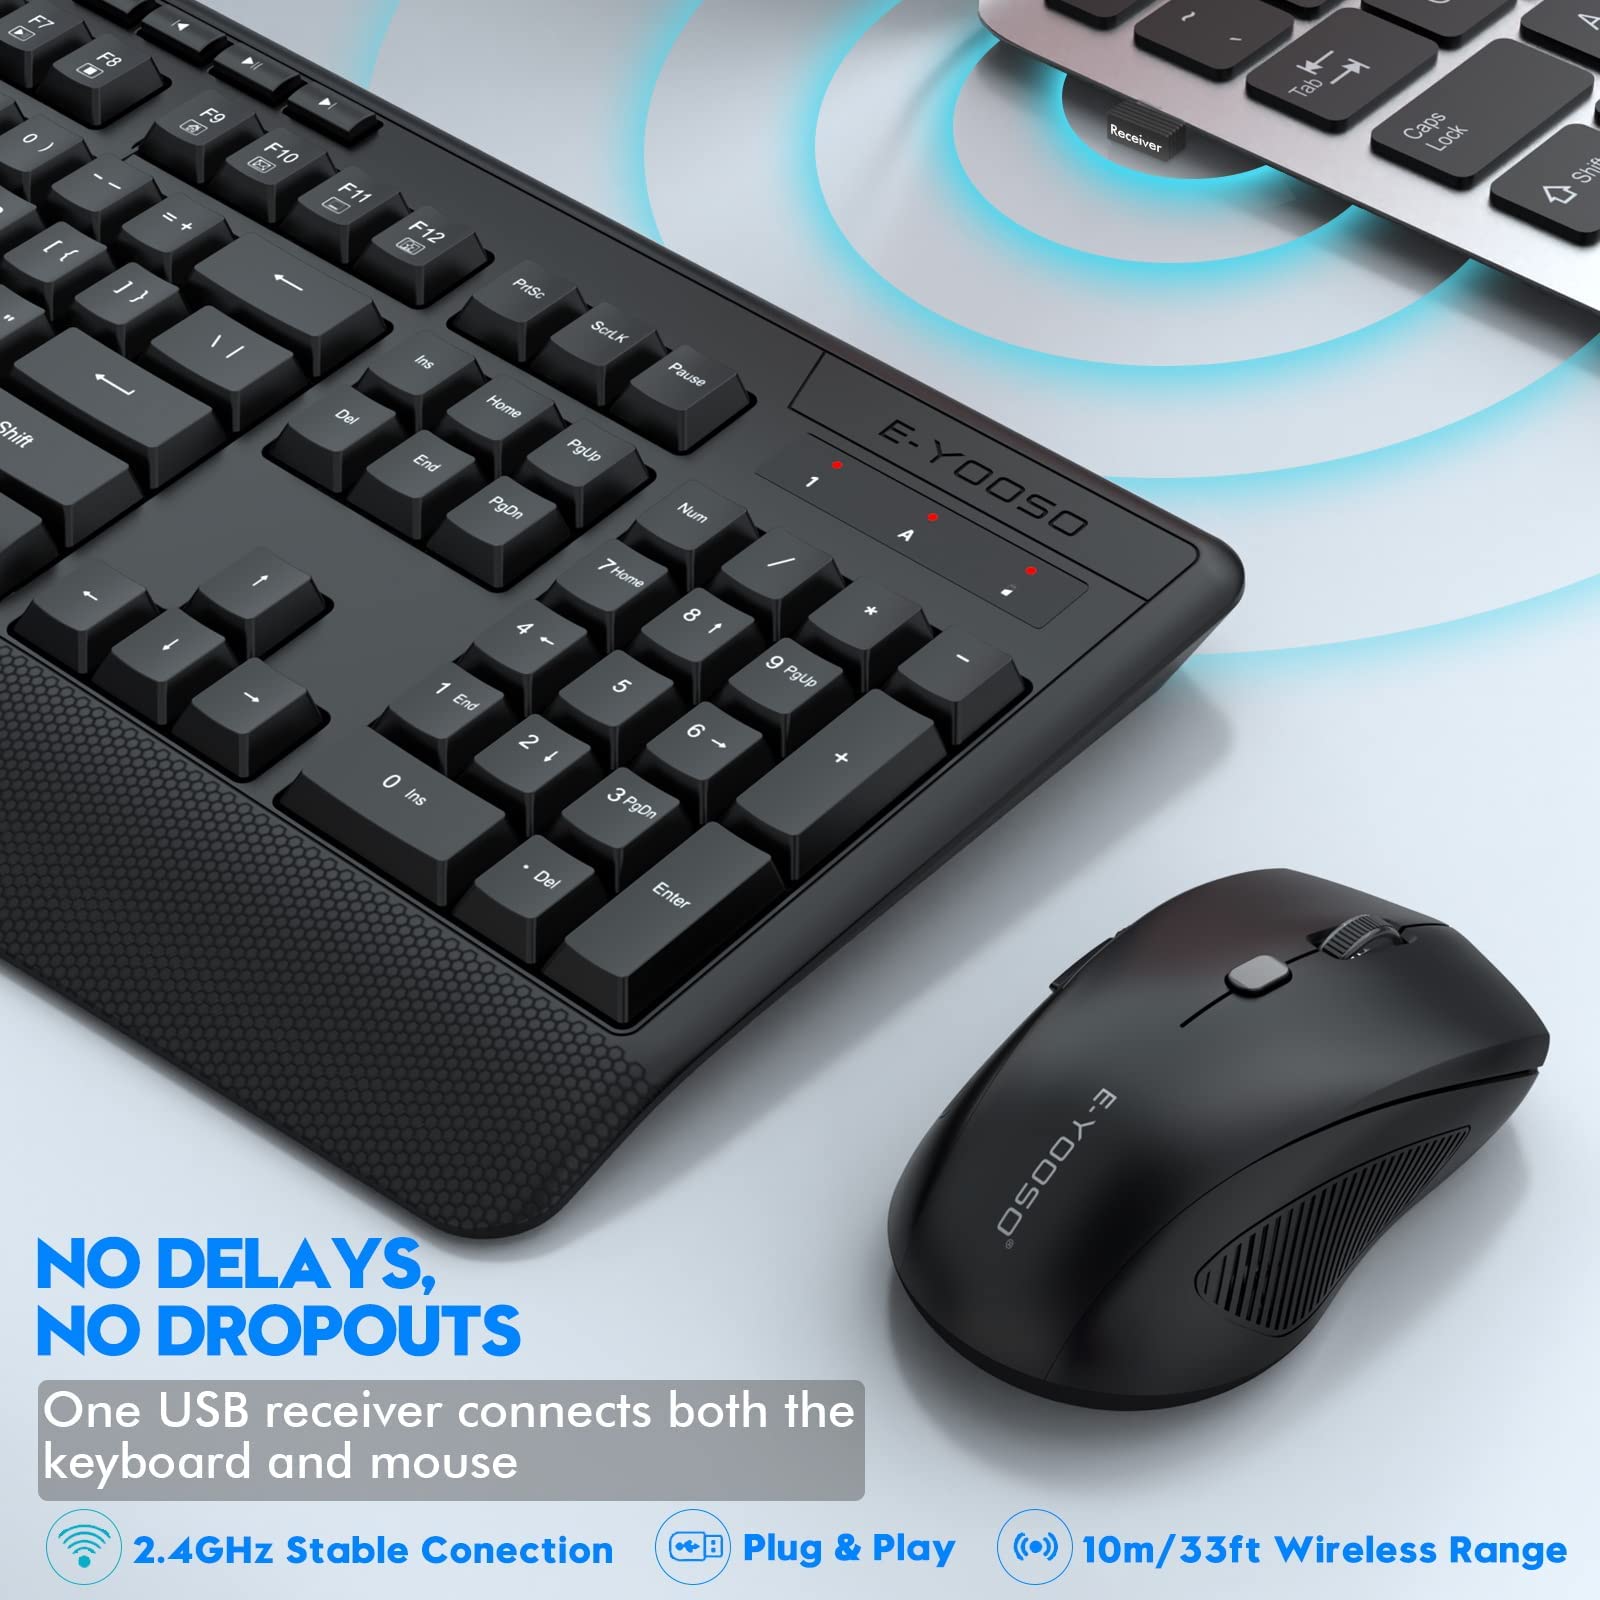 Wireless Keyboard and Mouse Combo, E-YOOSO 2.4GHz Full-Sized Ergonomic Wireless Keyboard with Wrist Rest, 3 DPI Adjustable and 6 Buttons Cordless USB Mouse for Computer, Laptop, PC, Windows, Mac